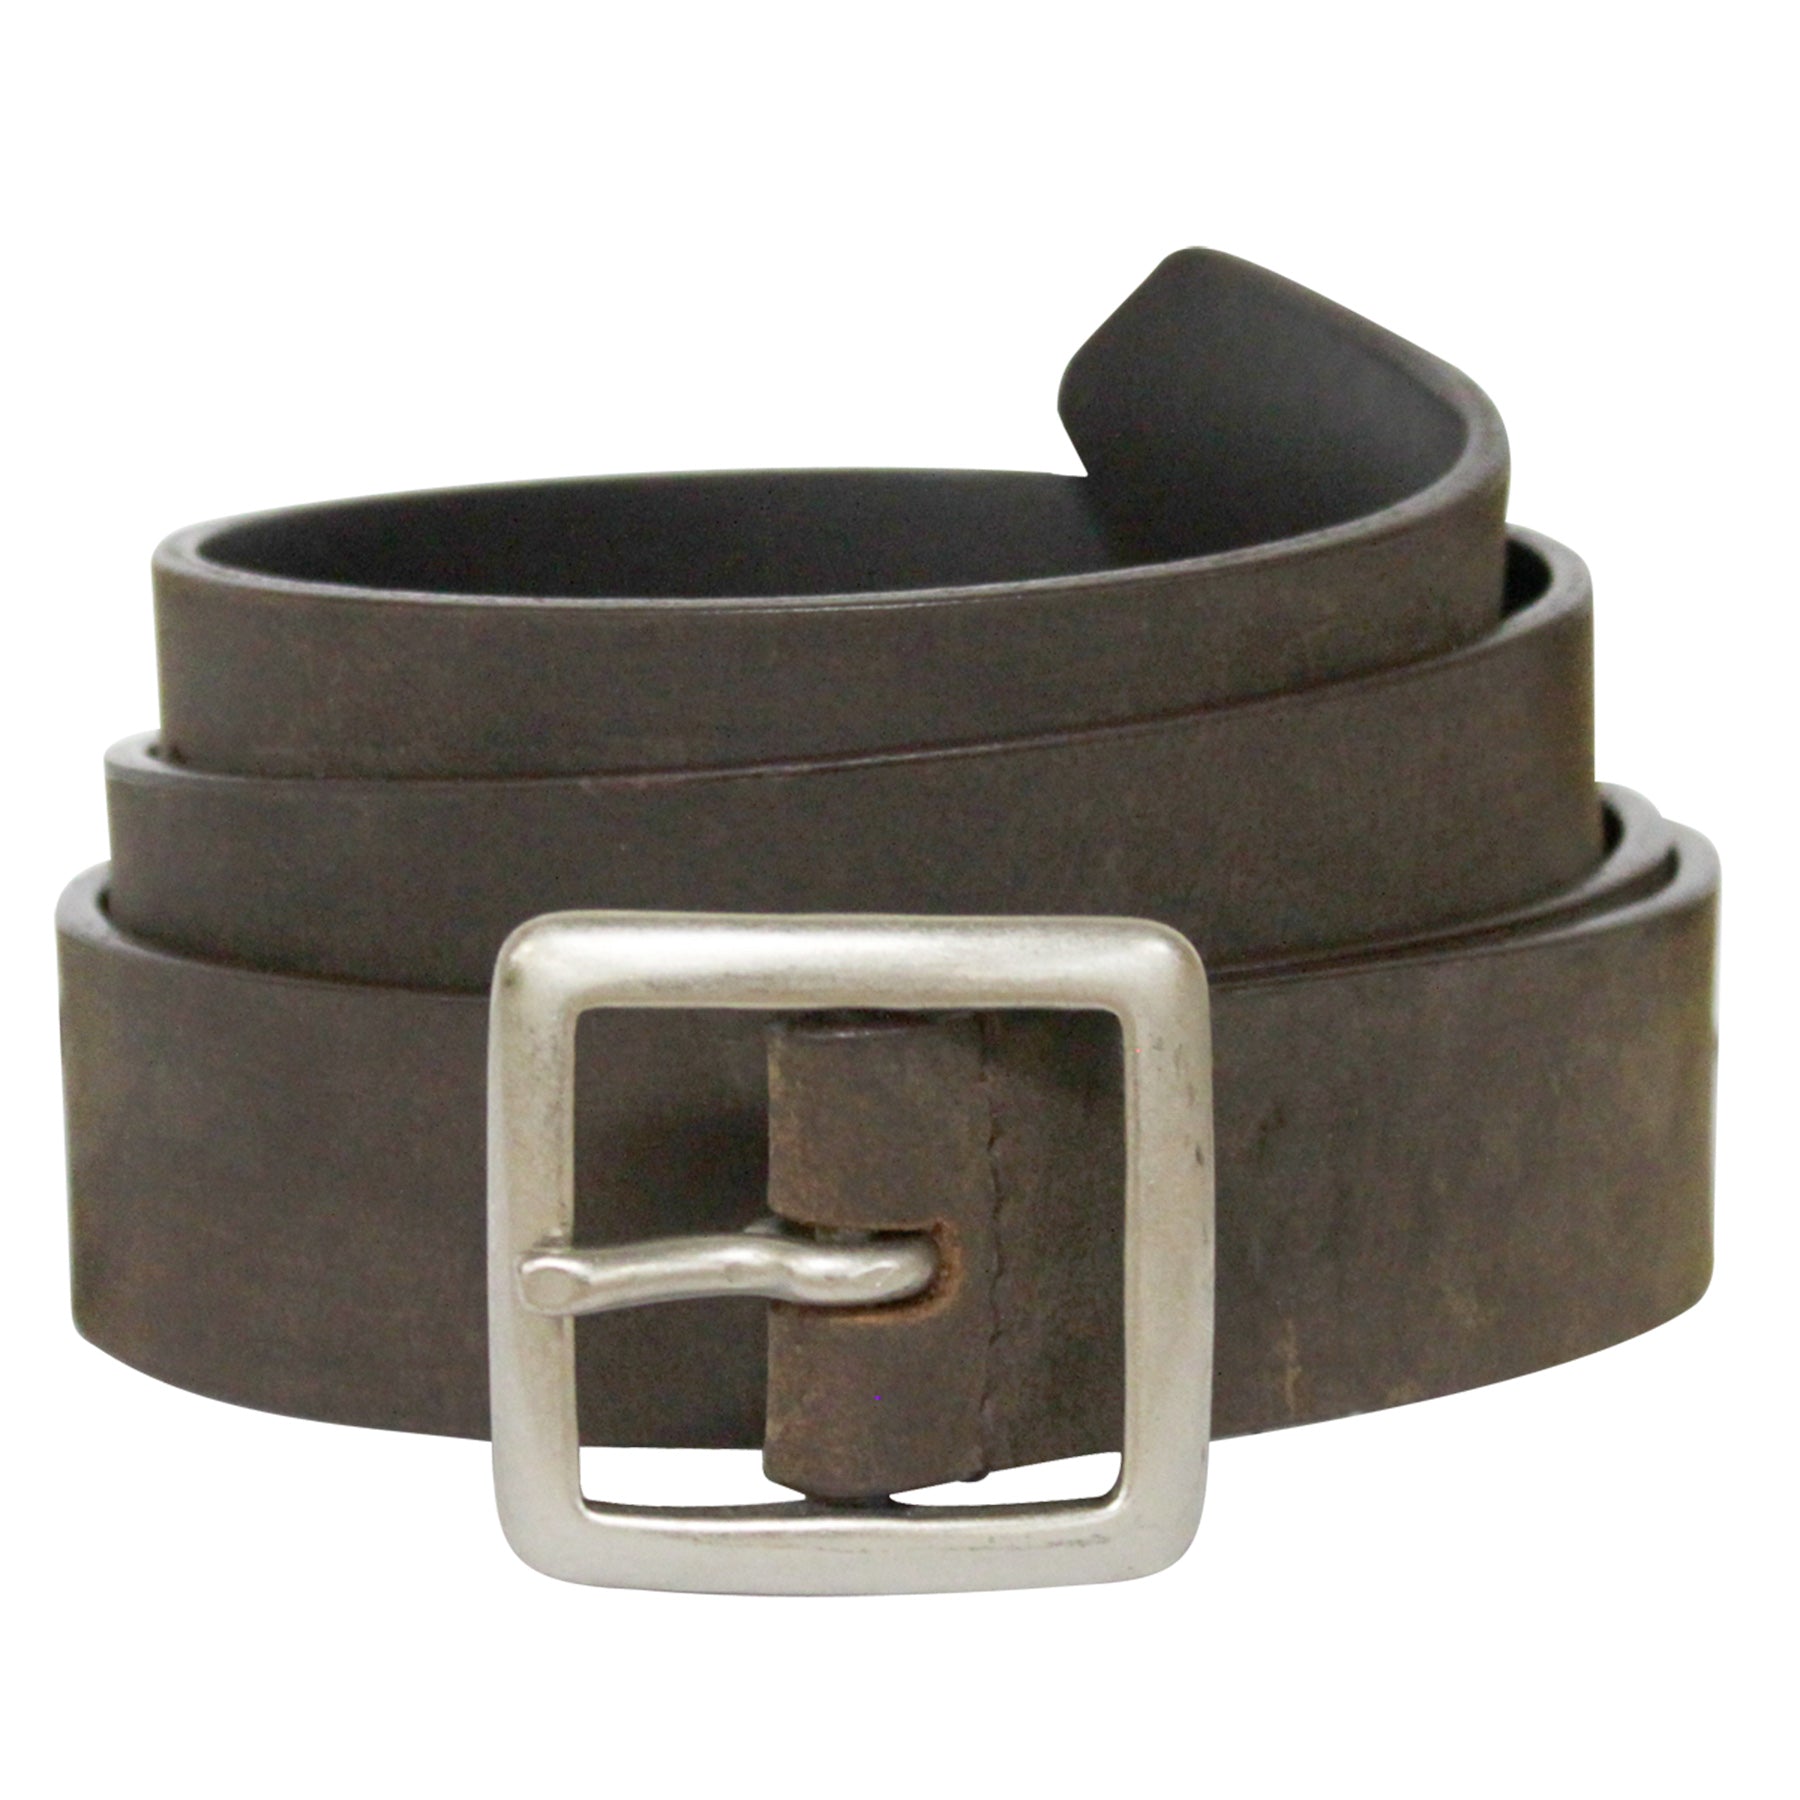 the bison designs classic leather belt in brown